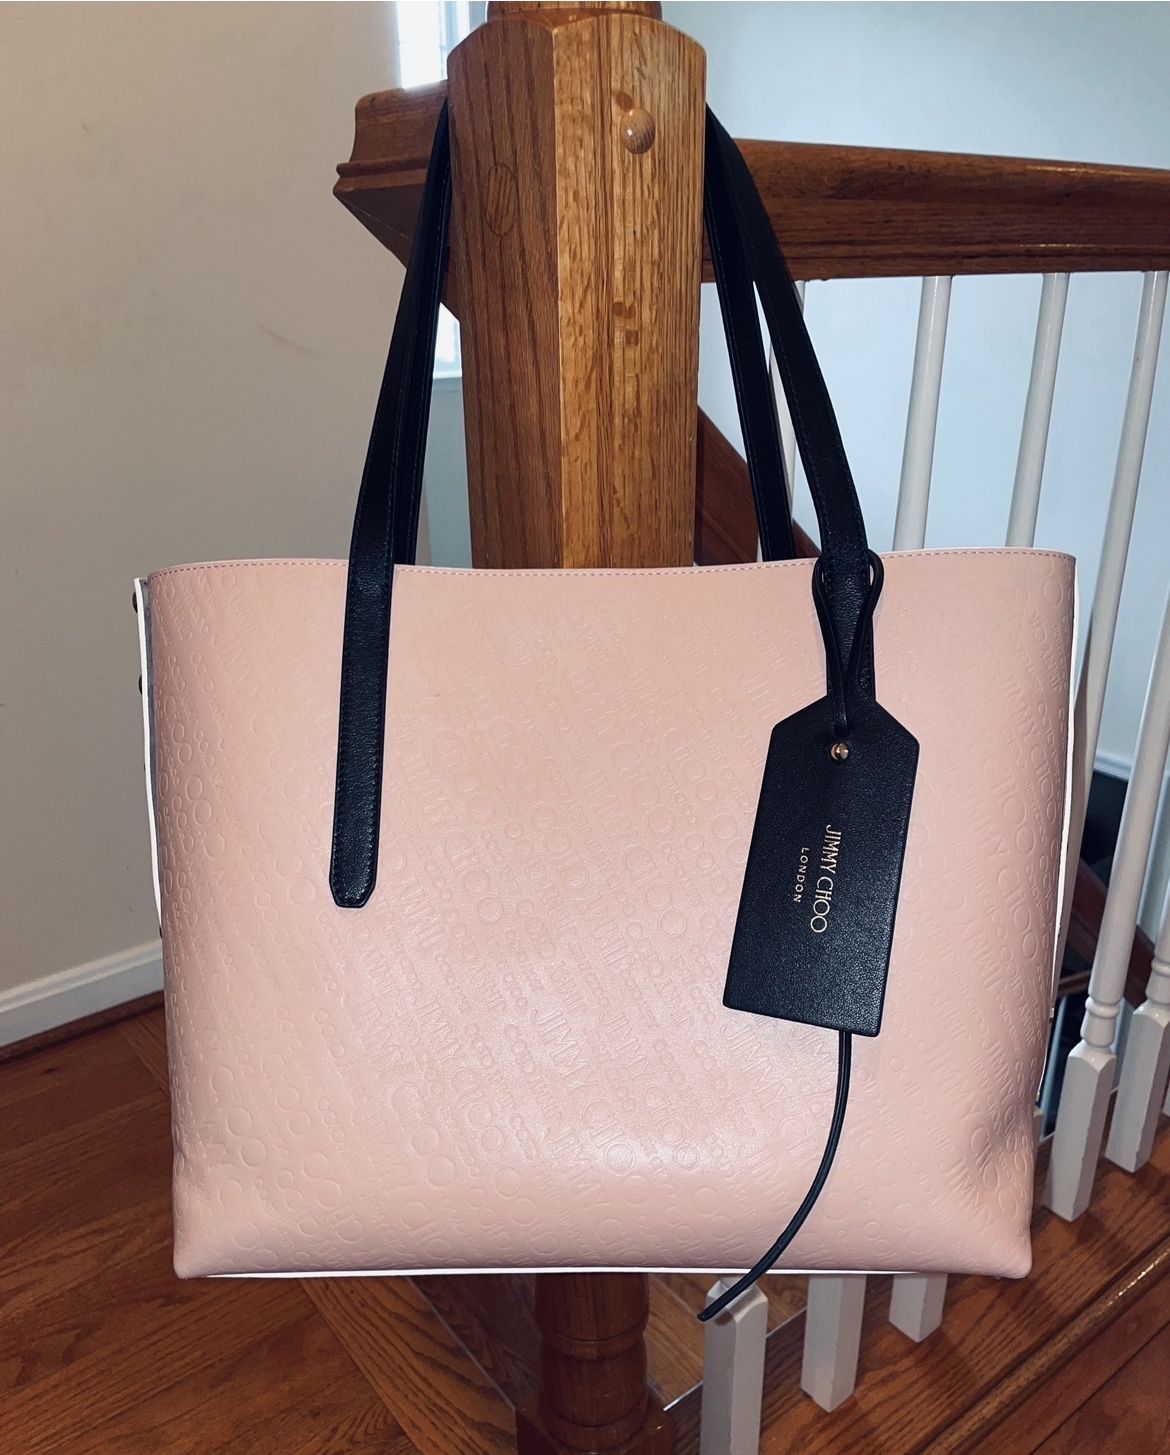 Authentic Jimmy Choo East West Tote ~ Used A Few Times MINT CONDITION ~ Asking: $500 OBO